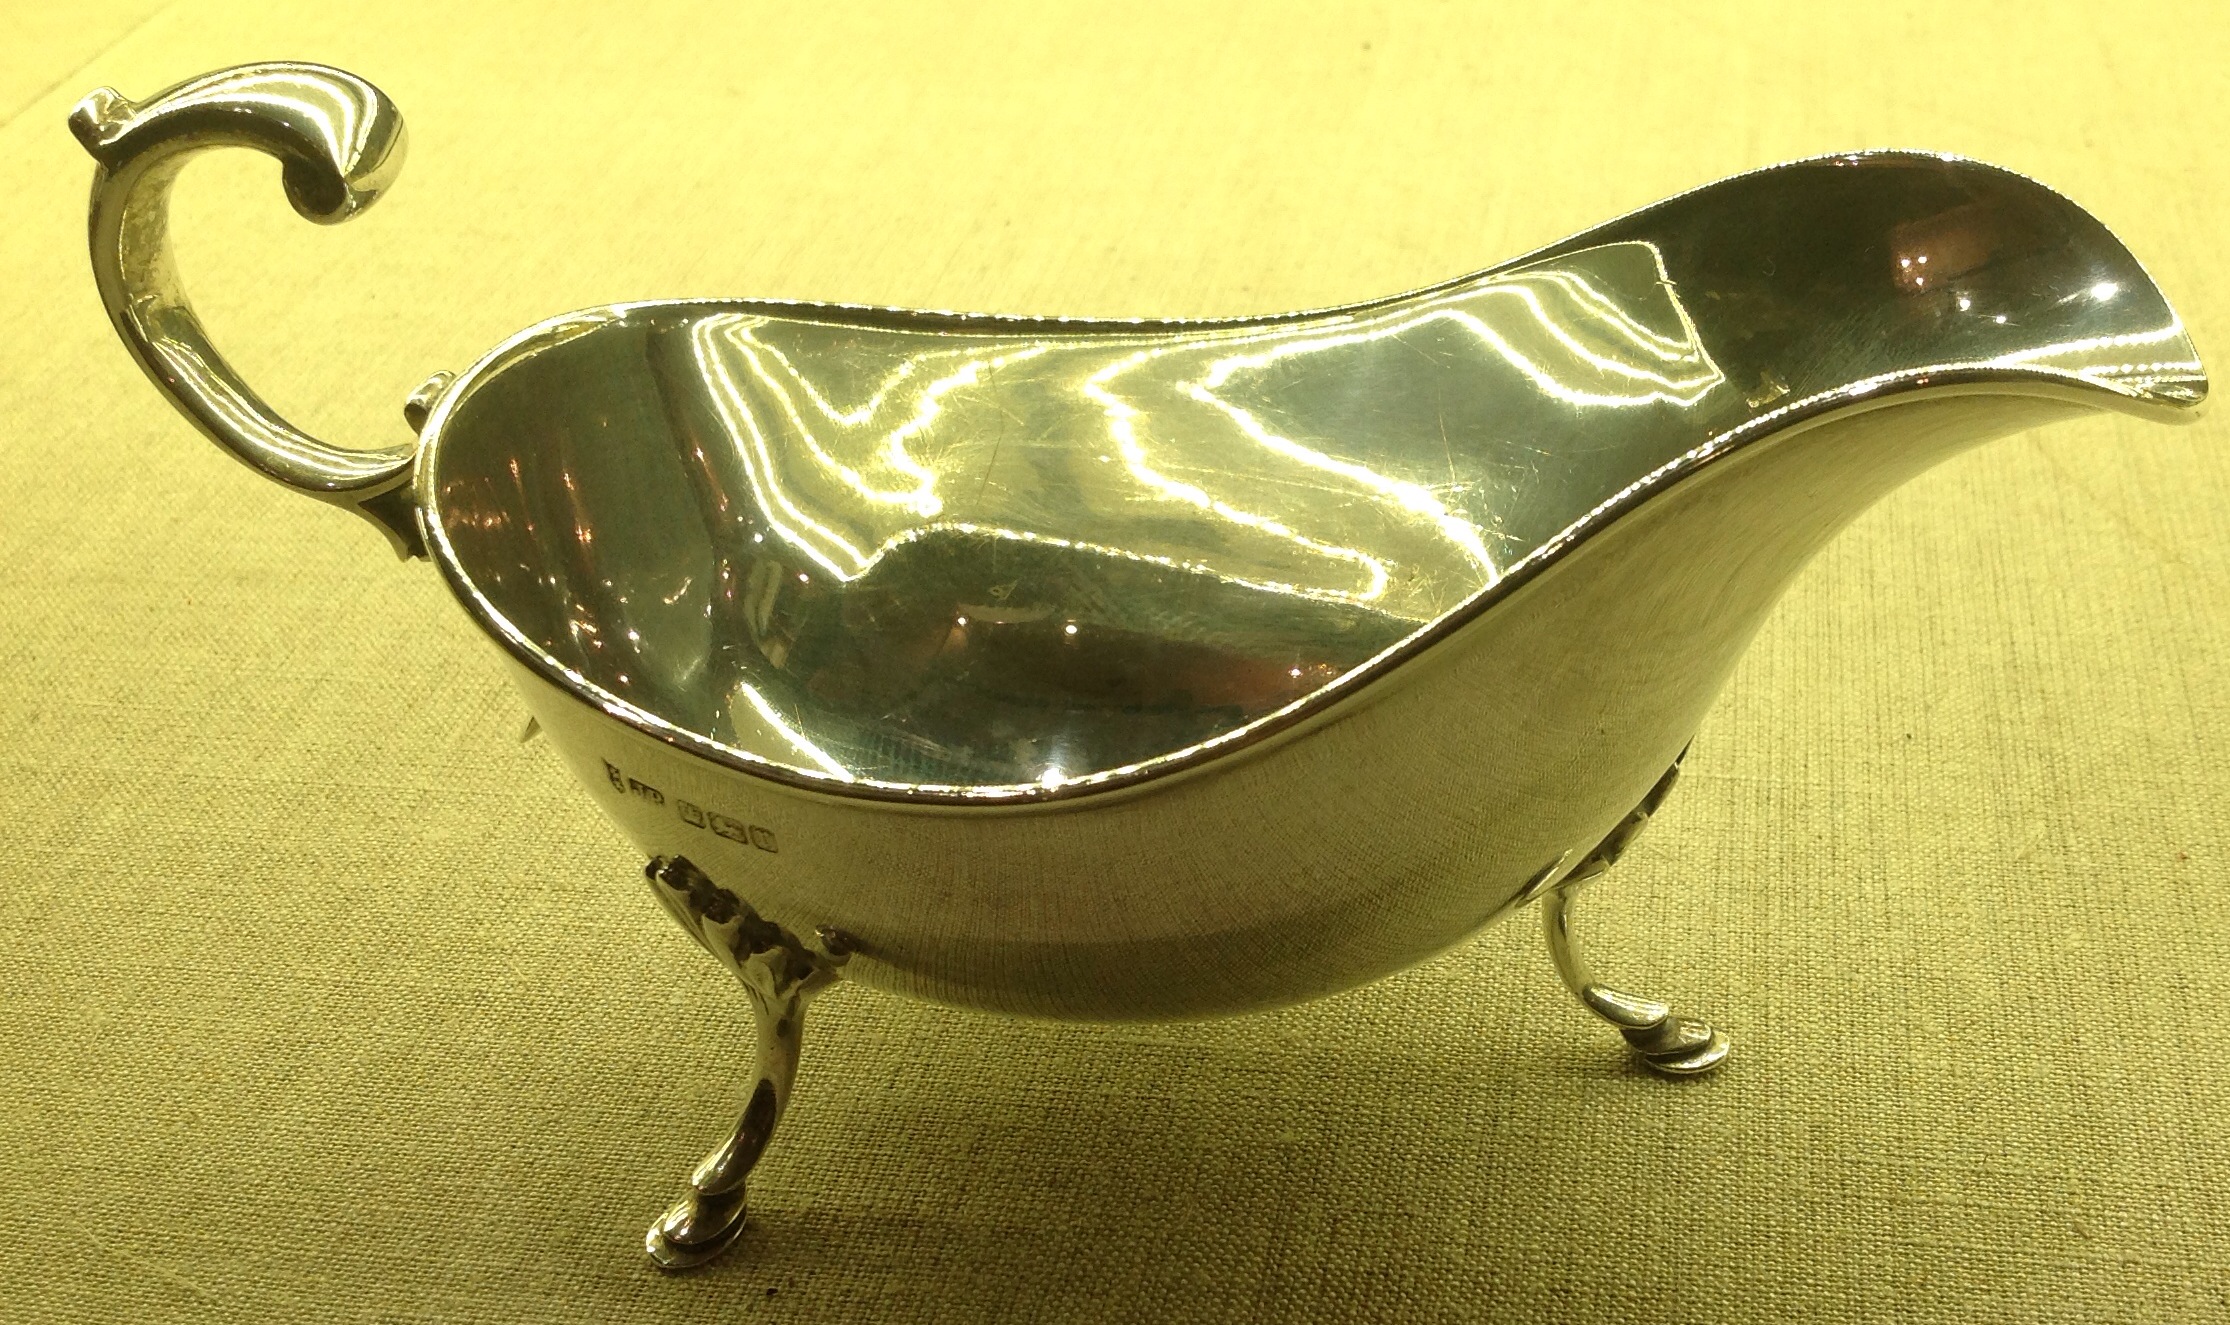 JOSEPH RODGERS, SHEFFIELD, 1899 A hallmarked silver sauce boat, along with a trefoil pattern